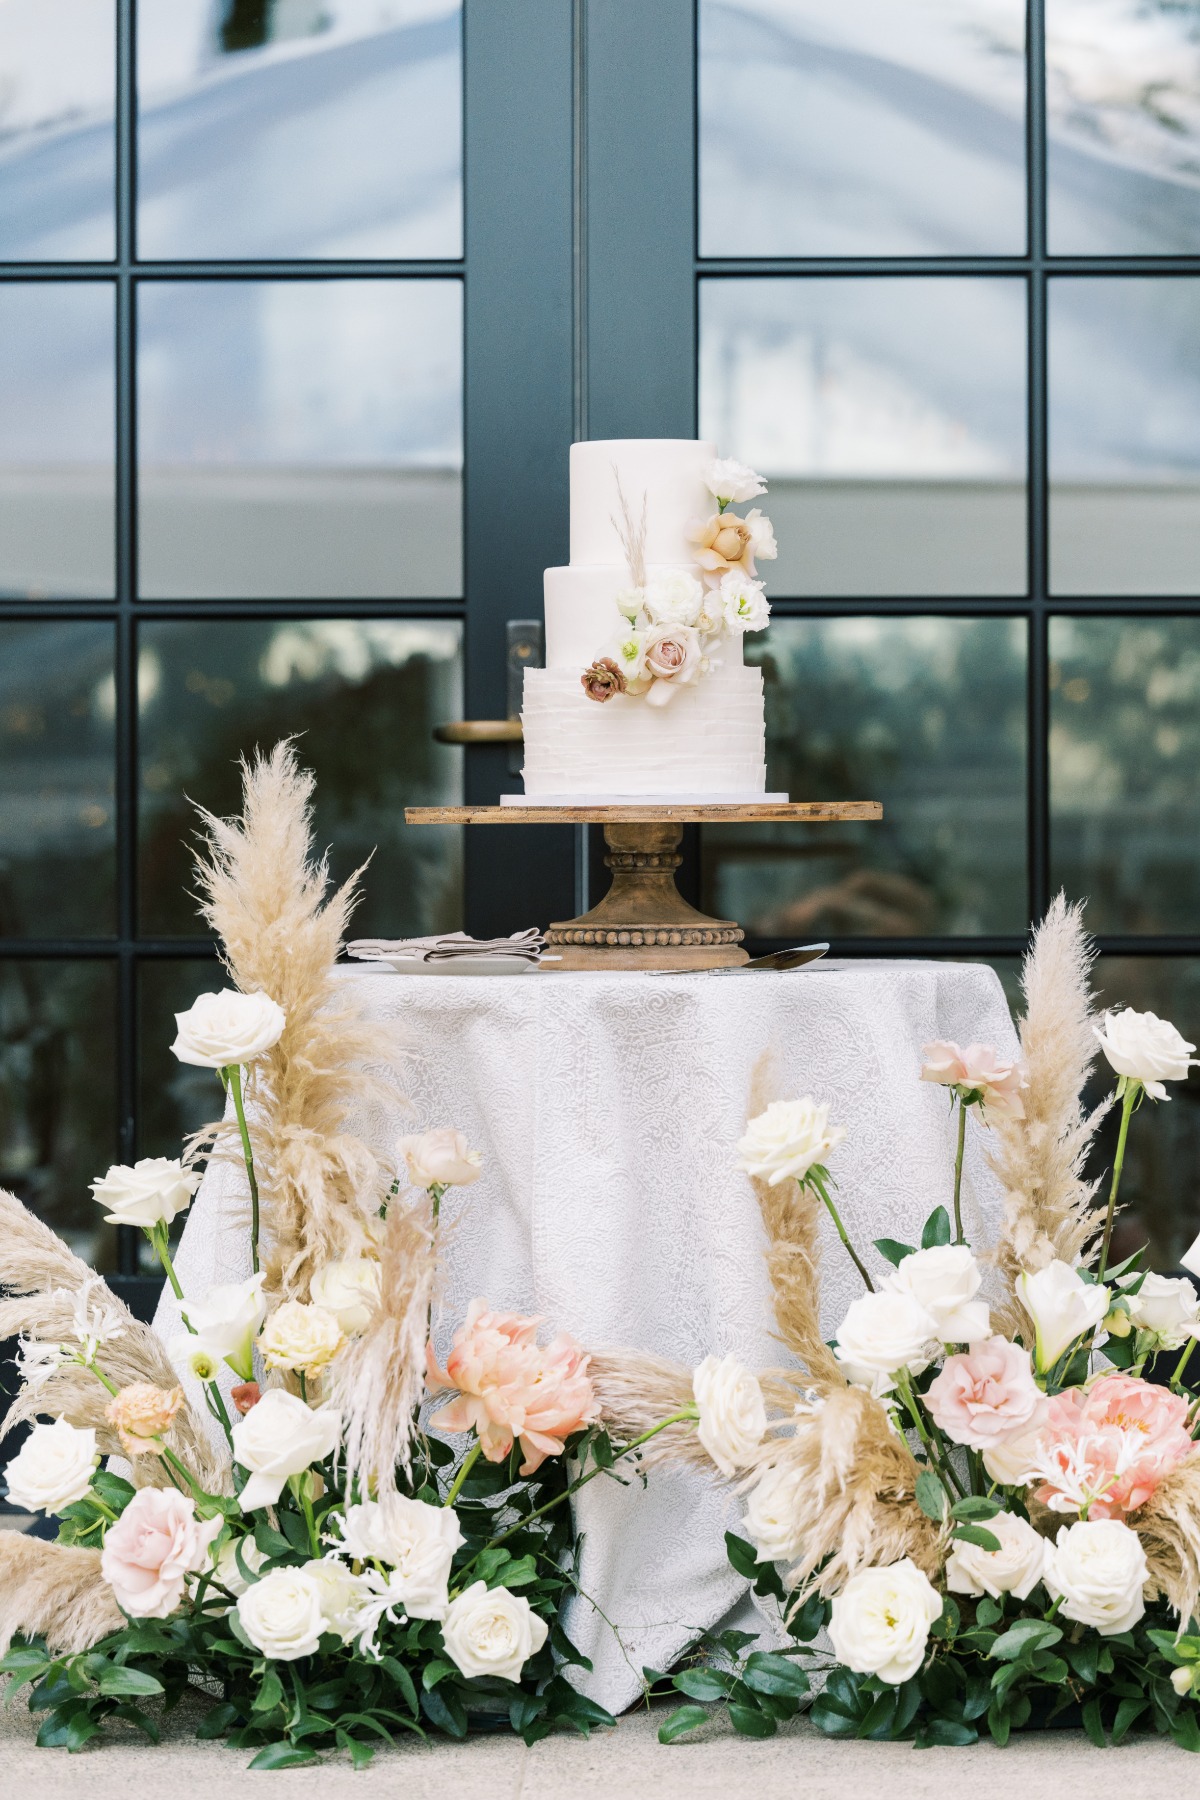 Wedding cake on table surrounded by florals